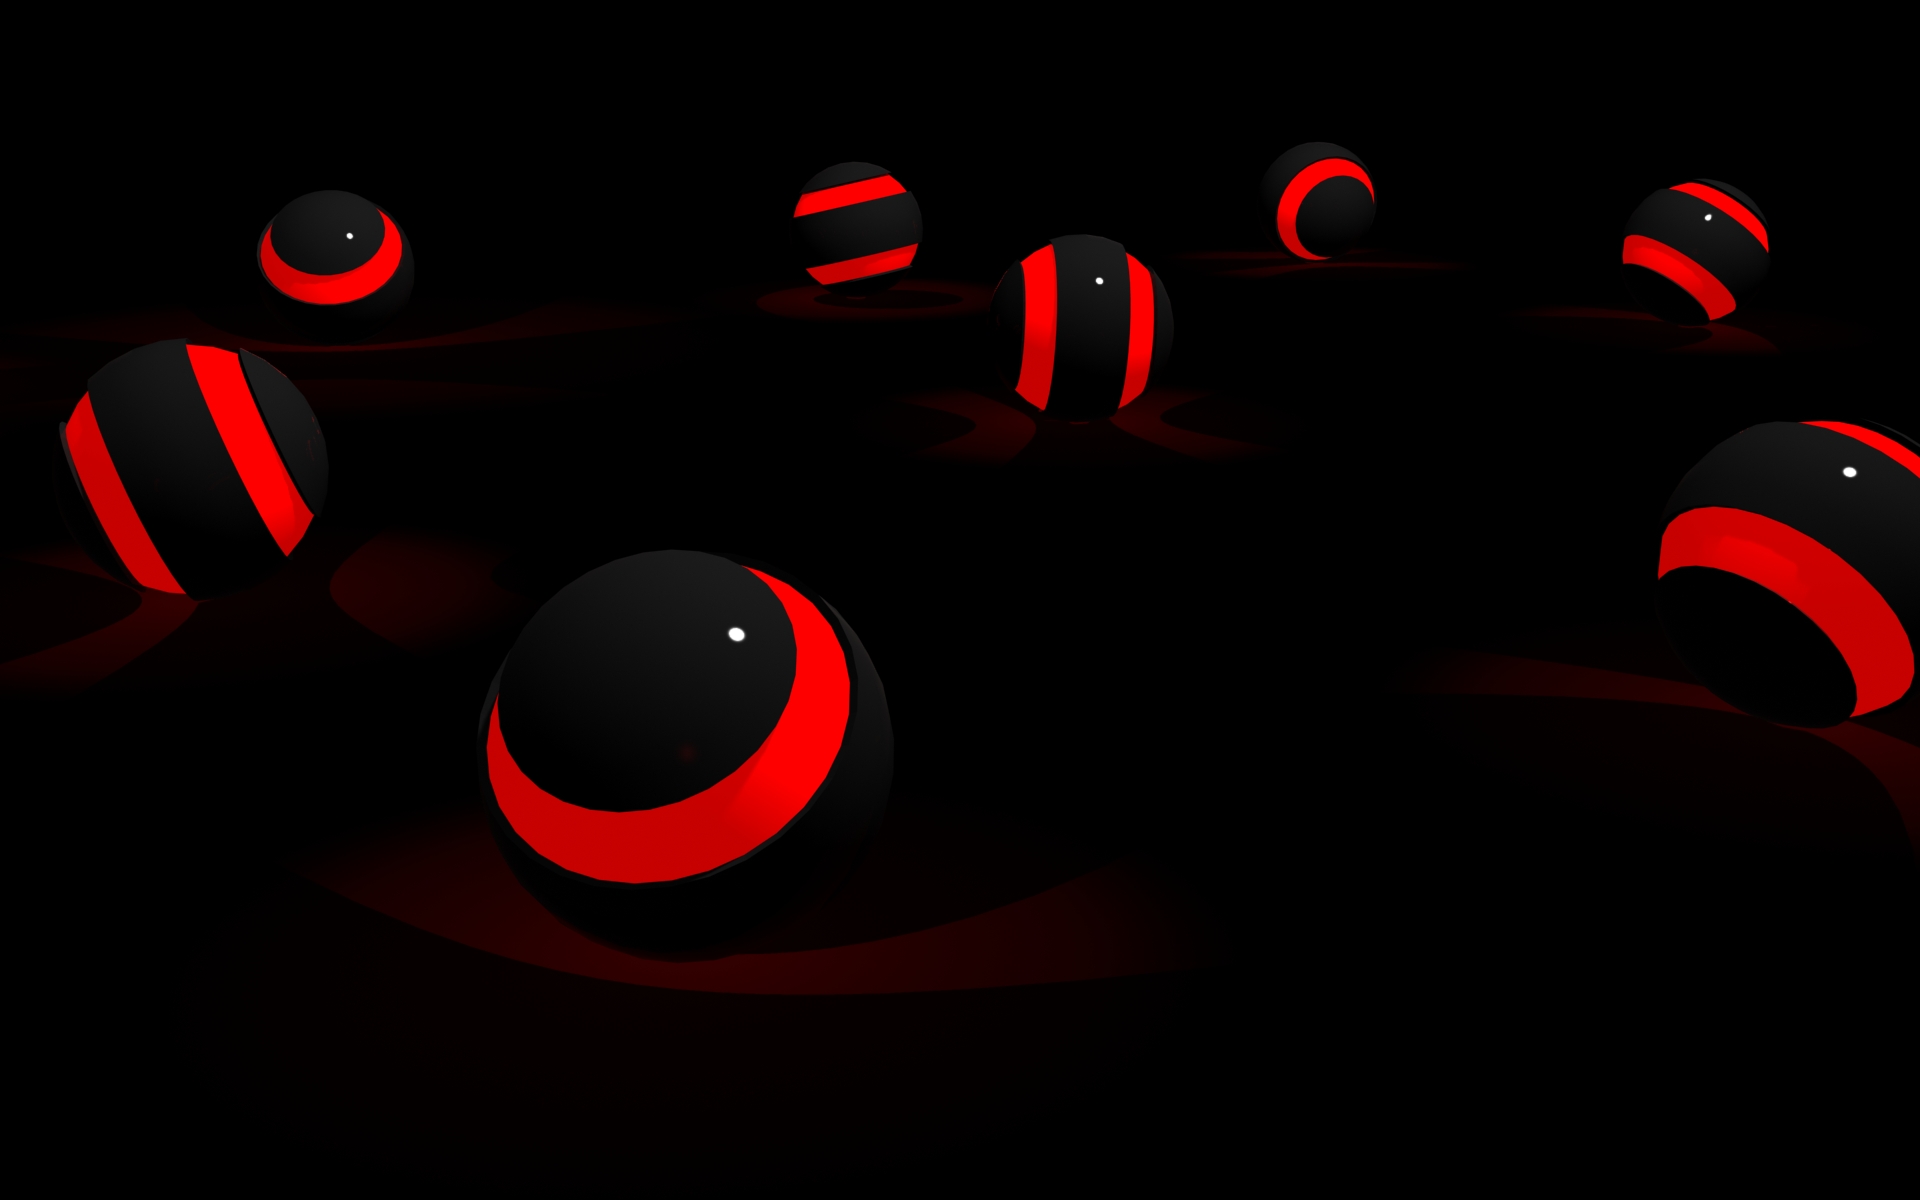 Black And Red Abstract Wallpaper HD In